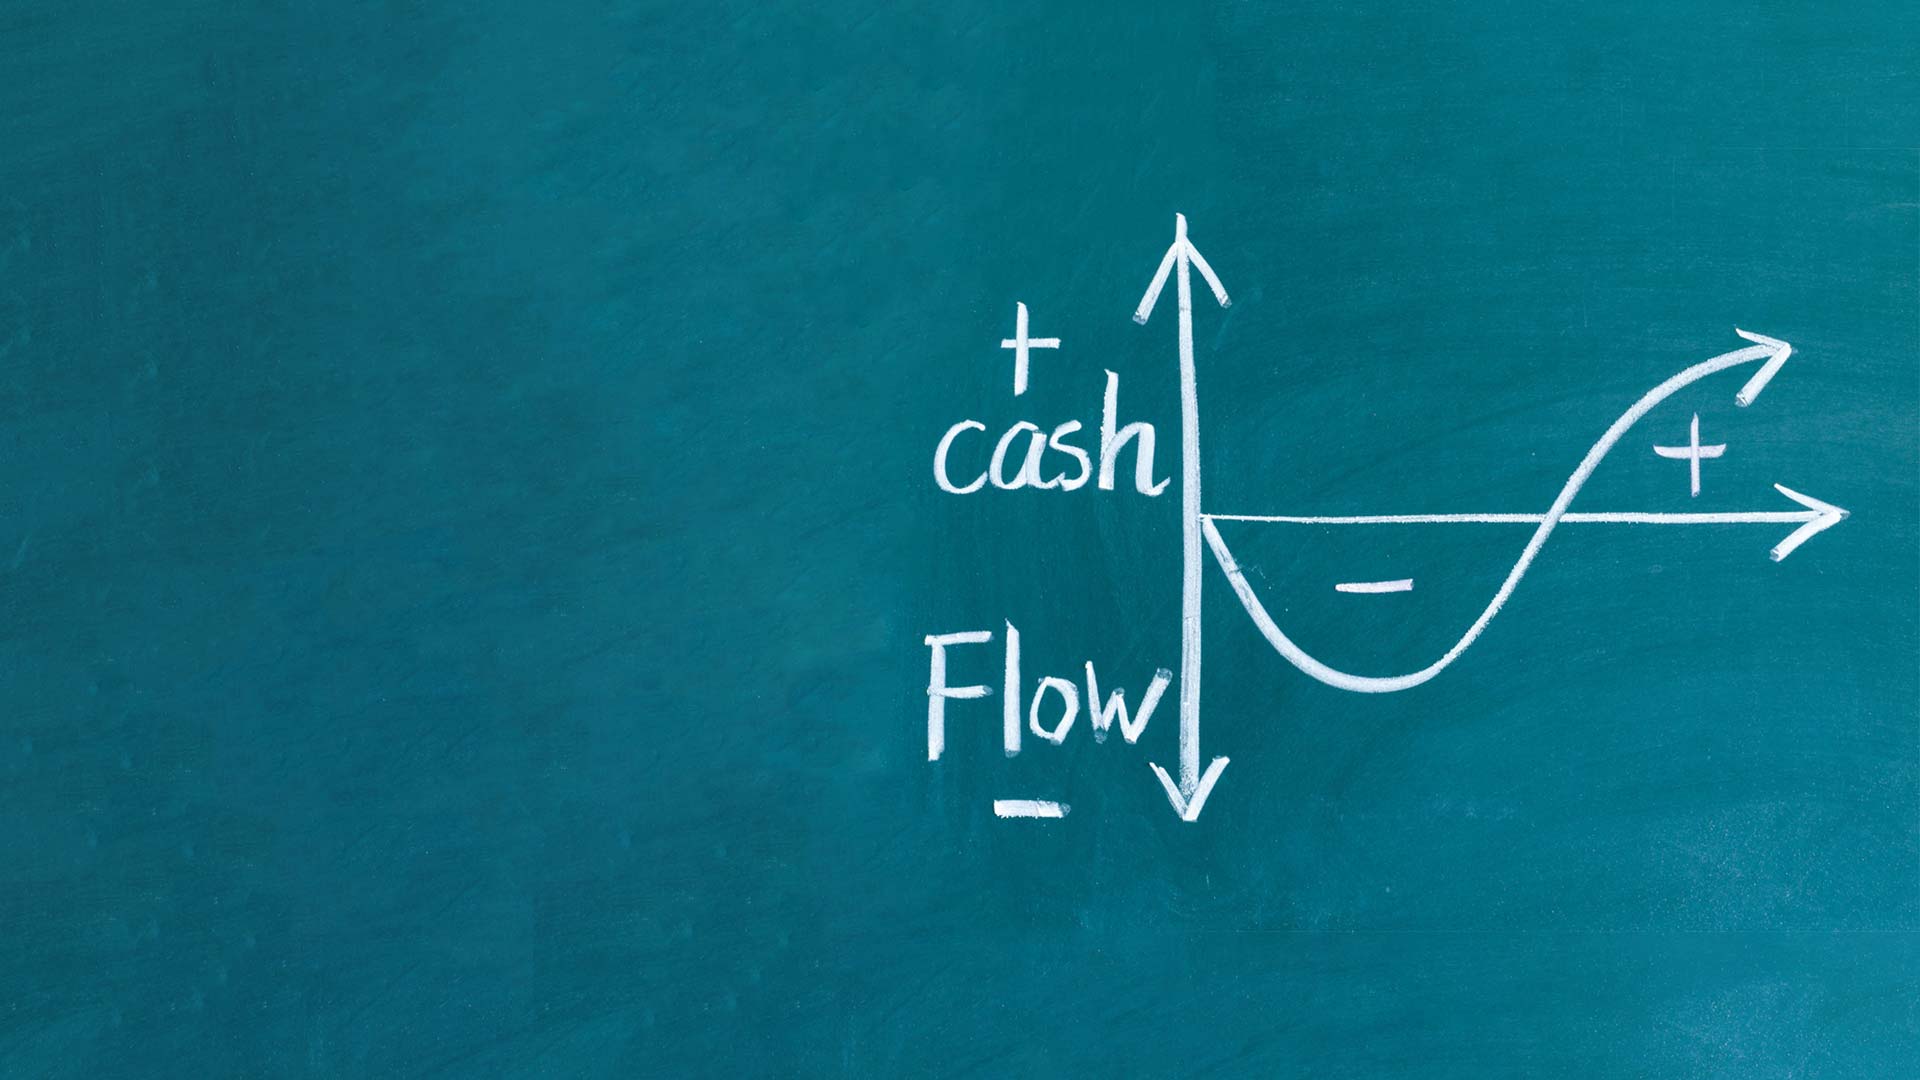 Cash flow analysis and impact on business valuation during COVID-10 pandemic.